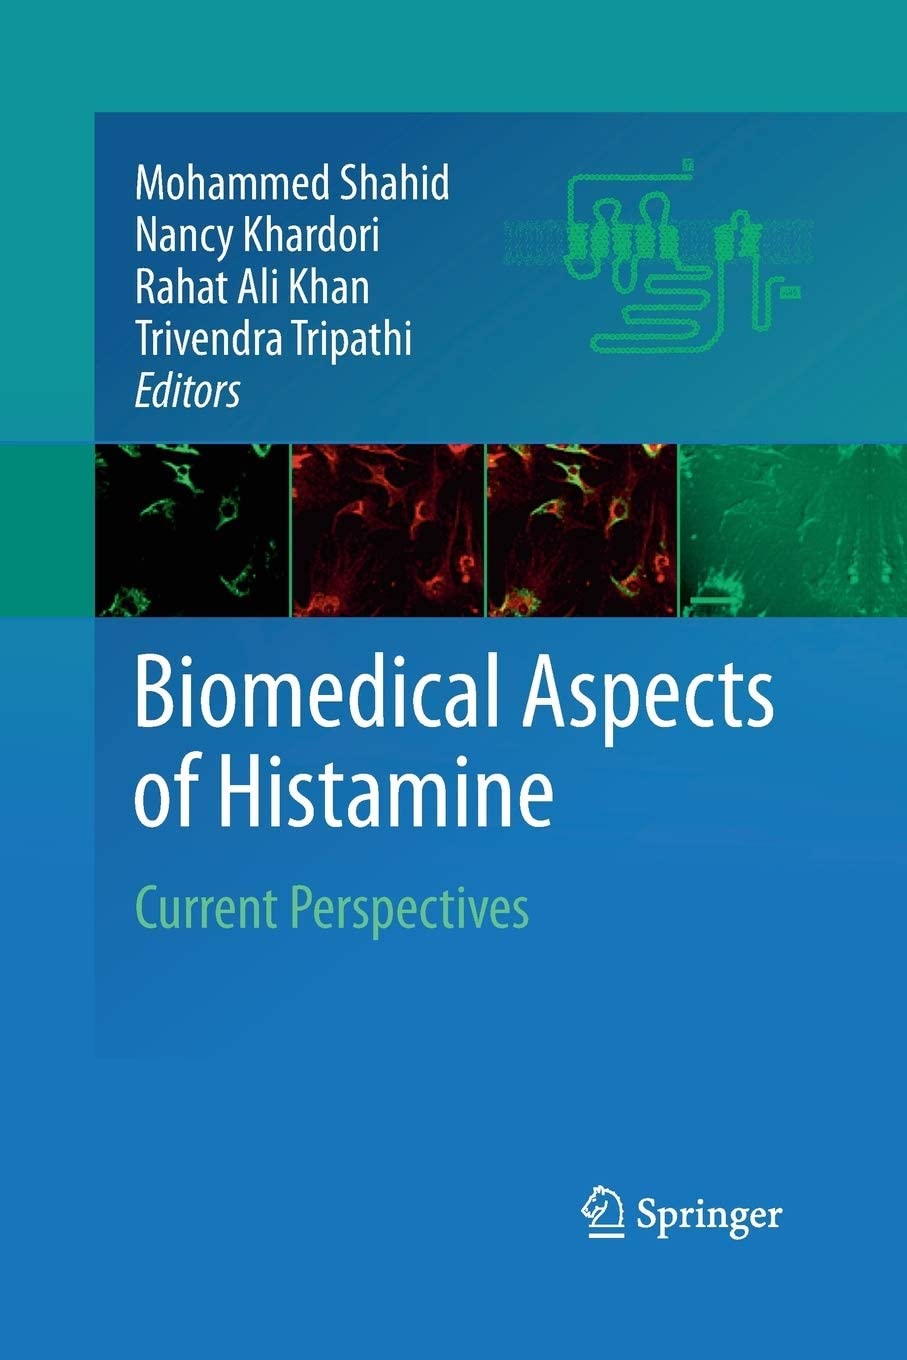 Biomedical Aspects of Histamine: Current Perspectives